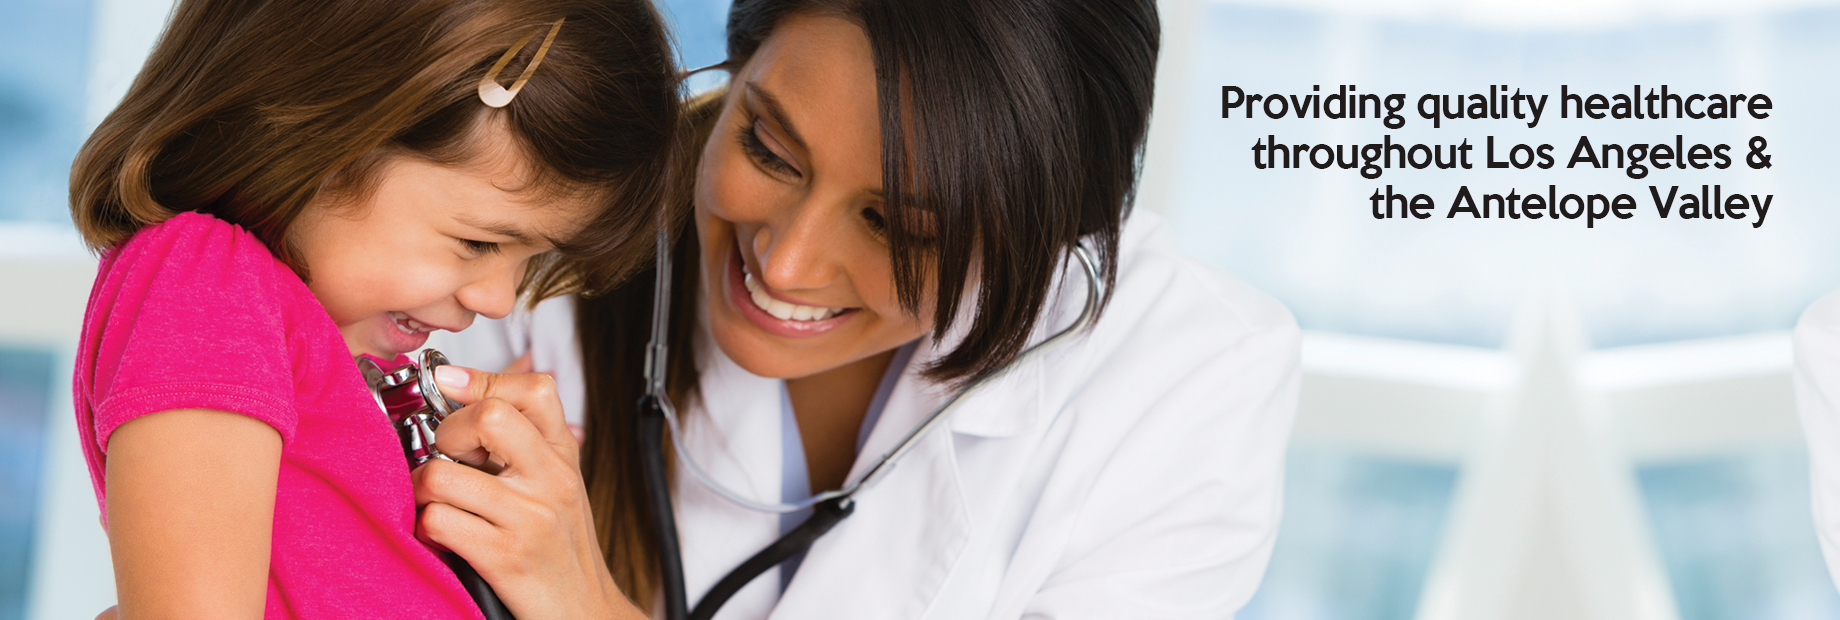 Providing quality healthcare throughout Los Angeles & the Antelope Valley